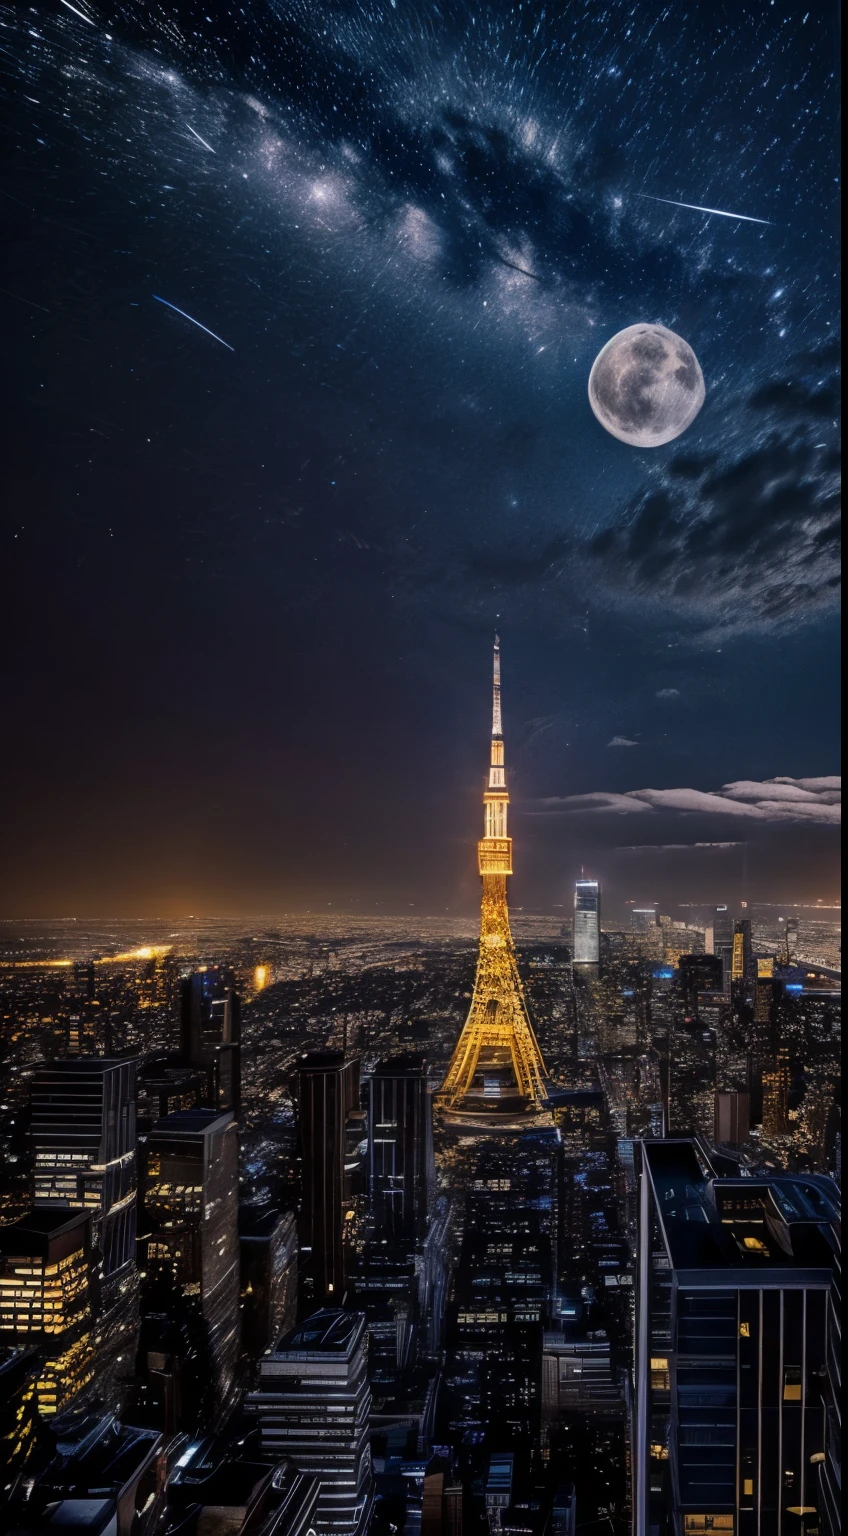 City night sky with full moon and stars, shooting star、Beautiful night view、Crisp night view、Tokyo Tower、Photographic footage、high resolution, night city background, night city background, Against the background of the night city, New York City at night, new york city background, The moon is big in the city, The city that never sleeps, 